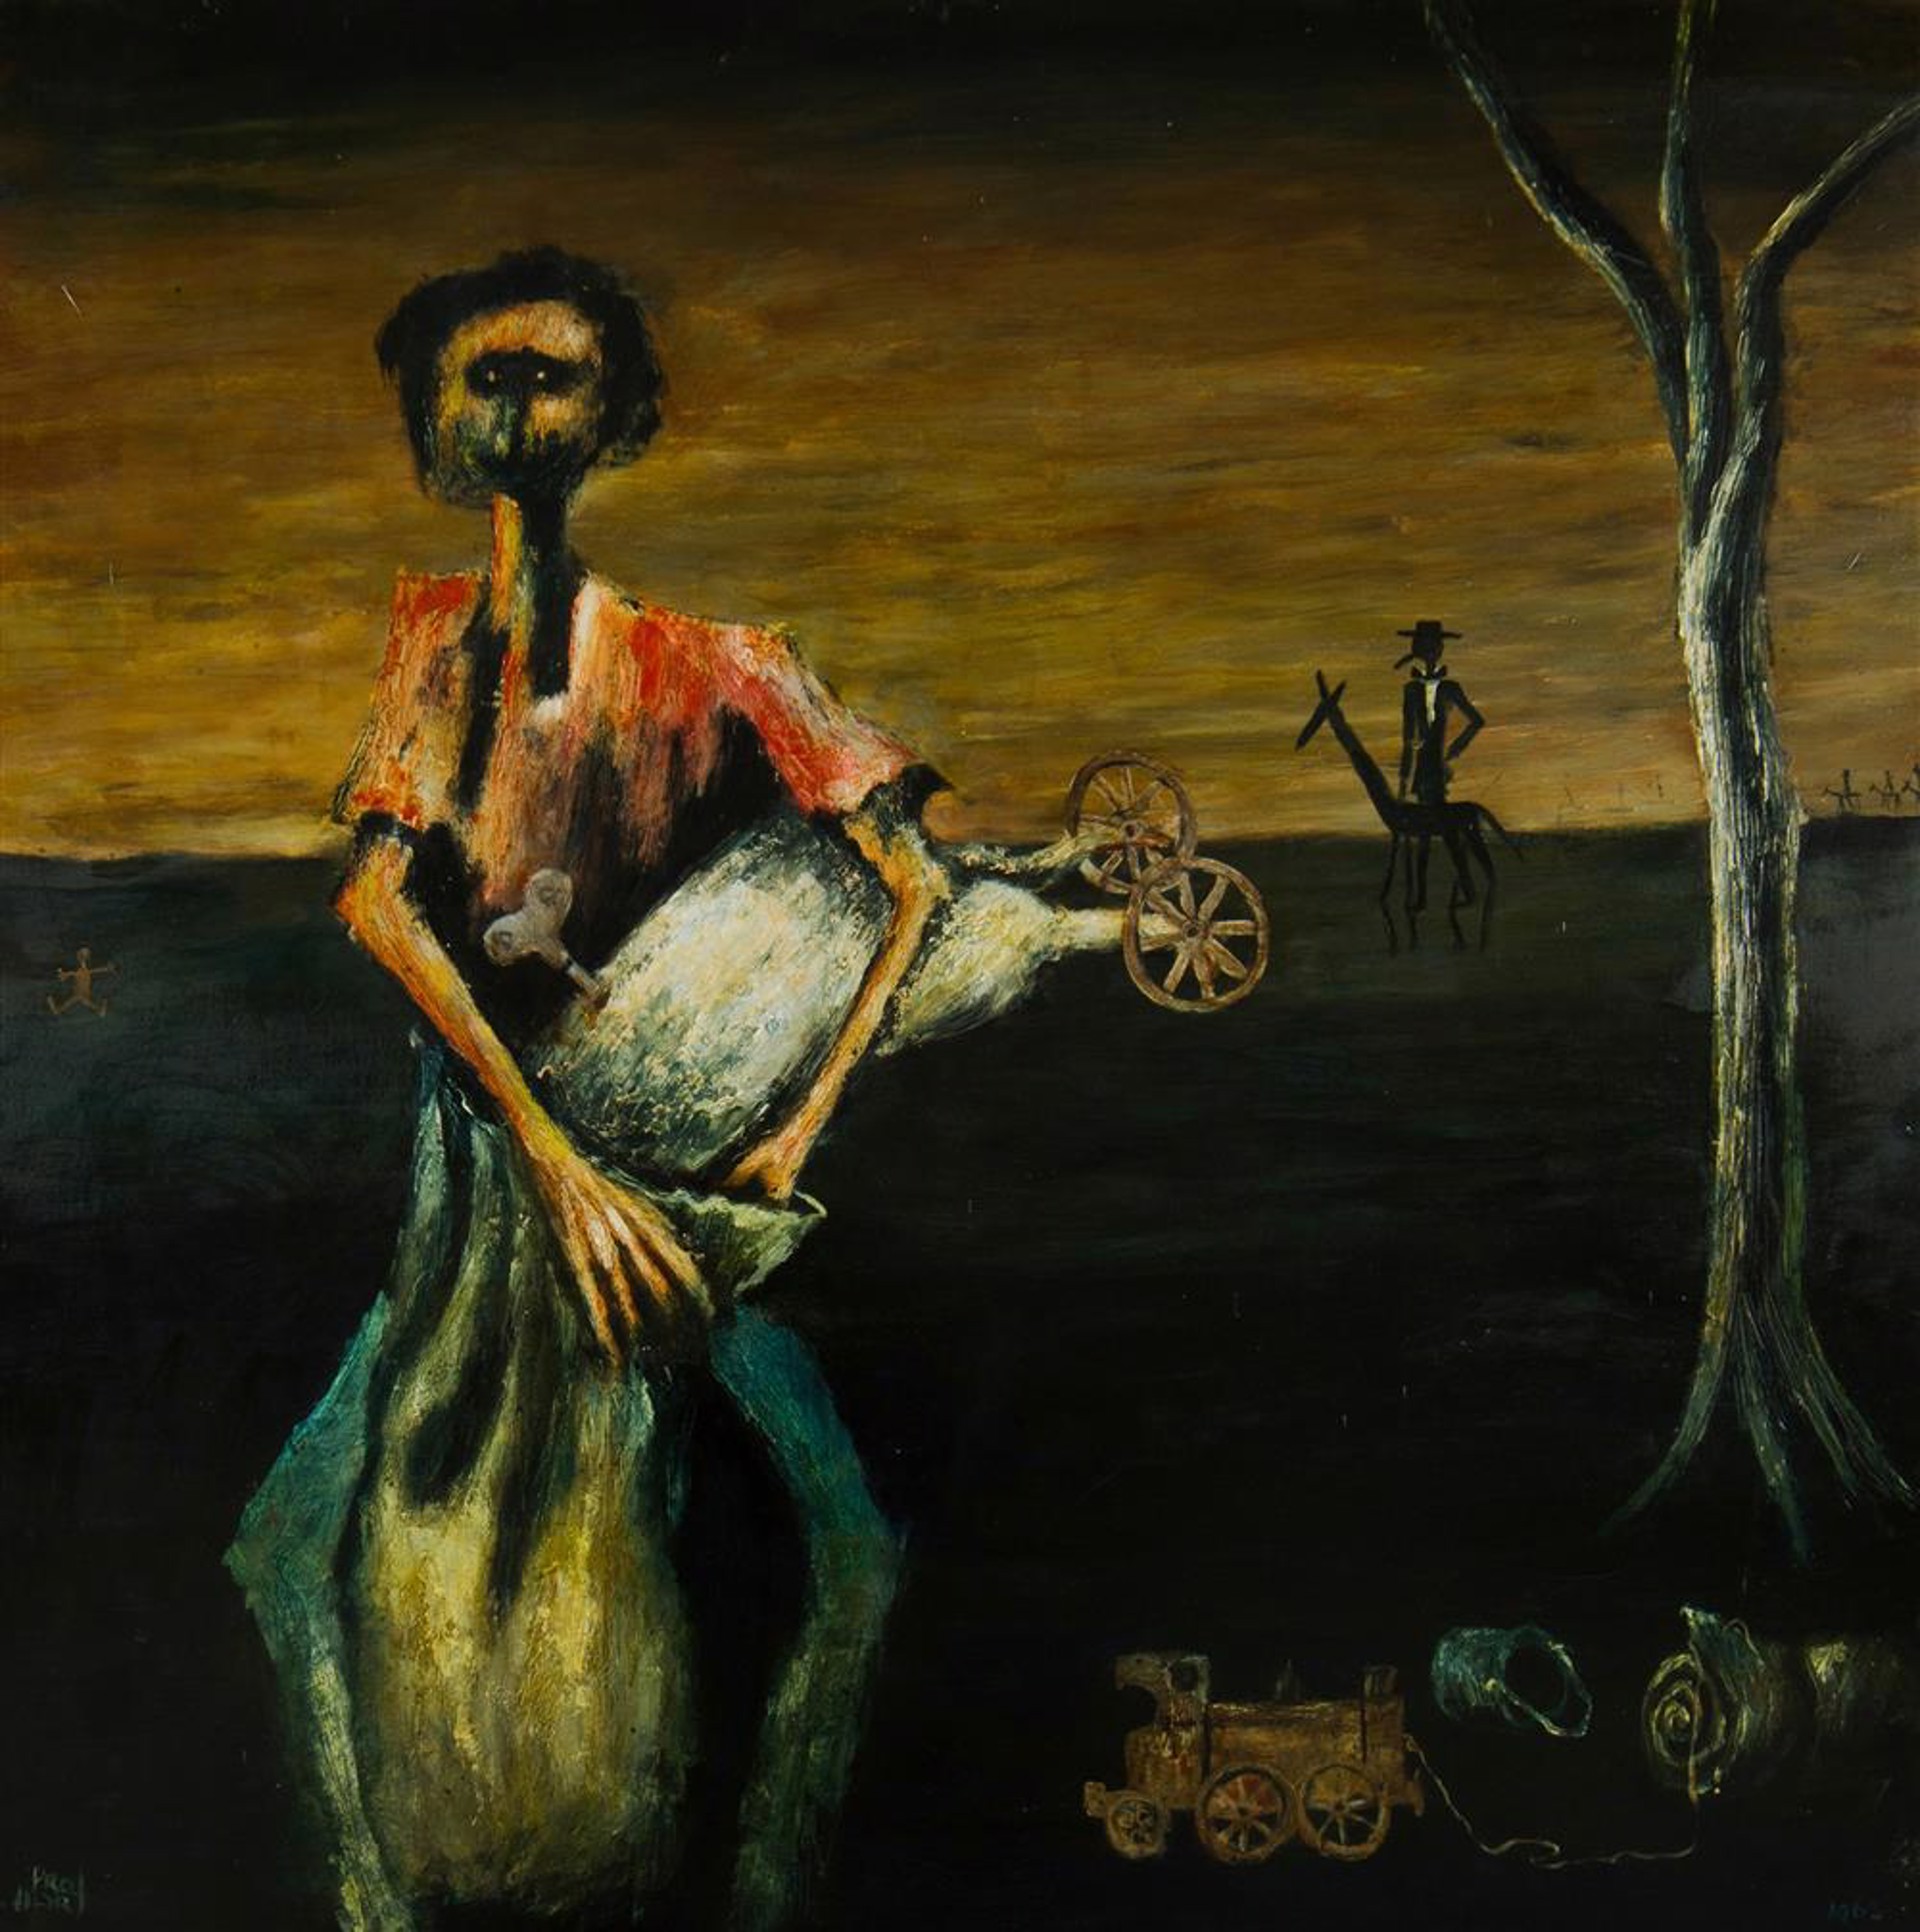 Swagman with Sheep by Pro Hart